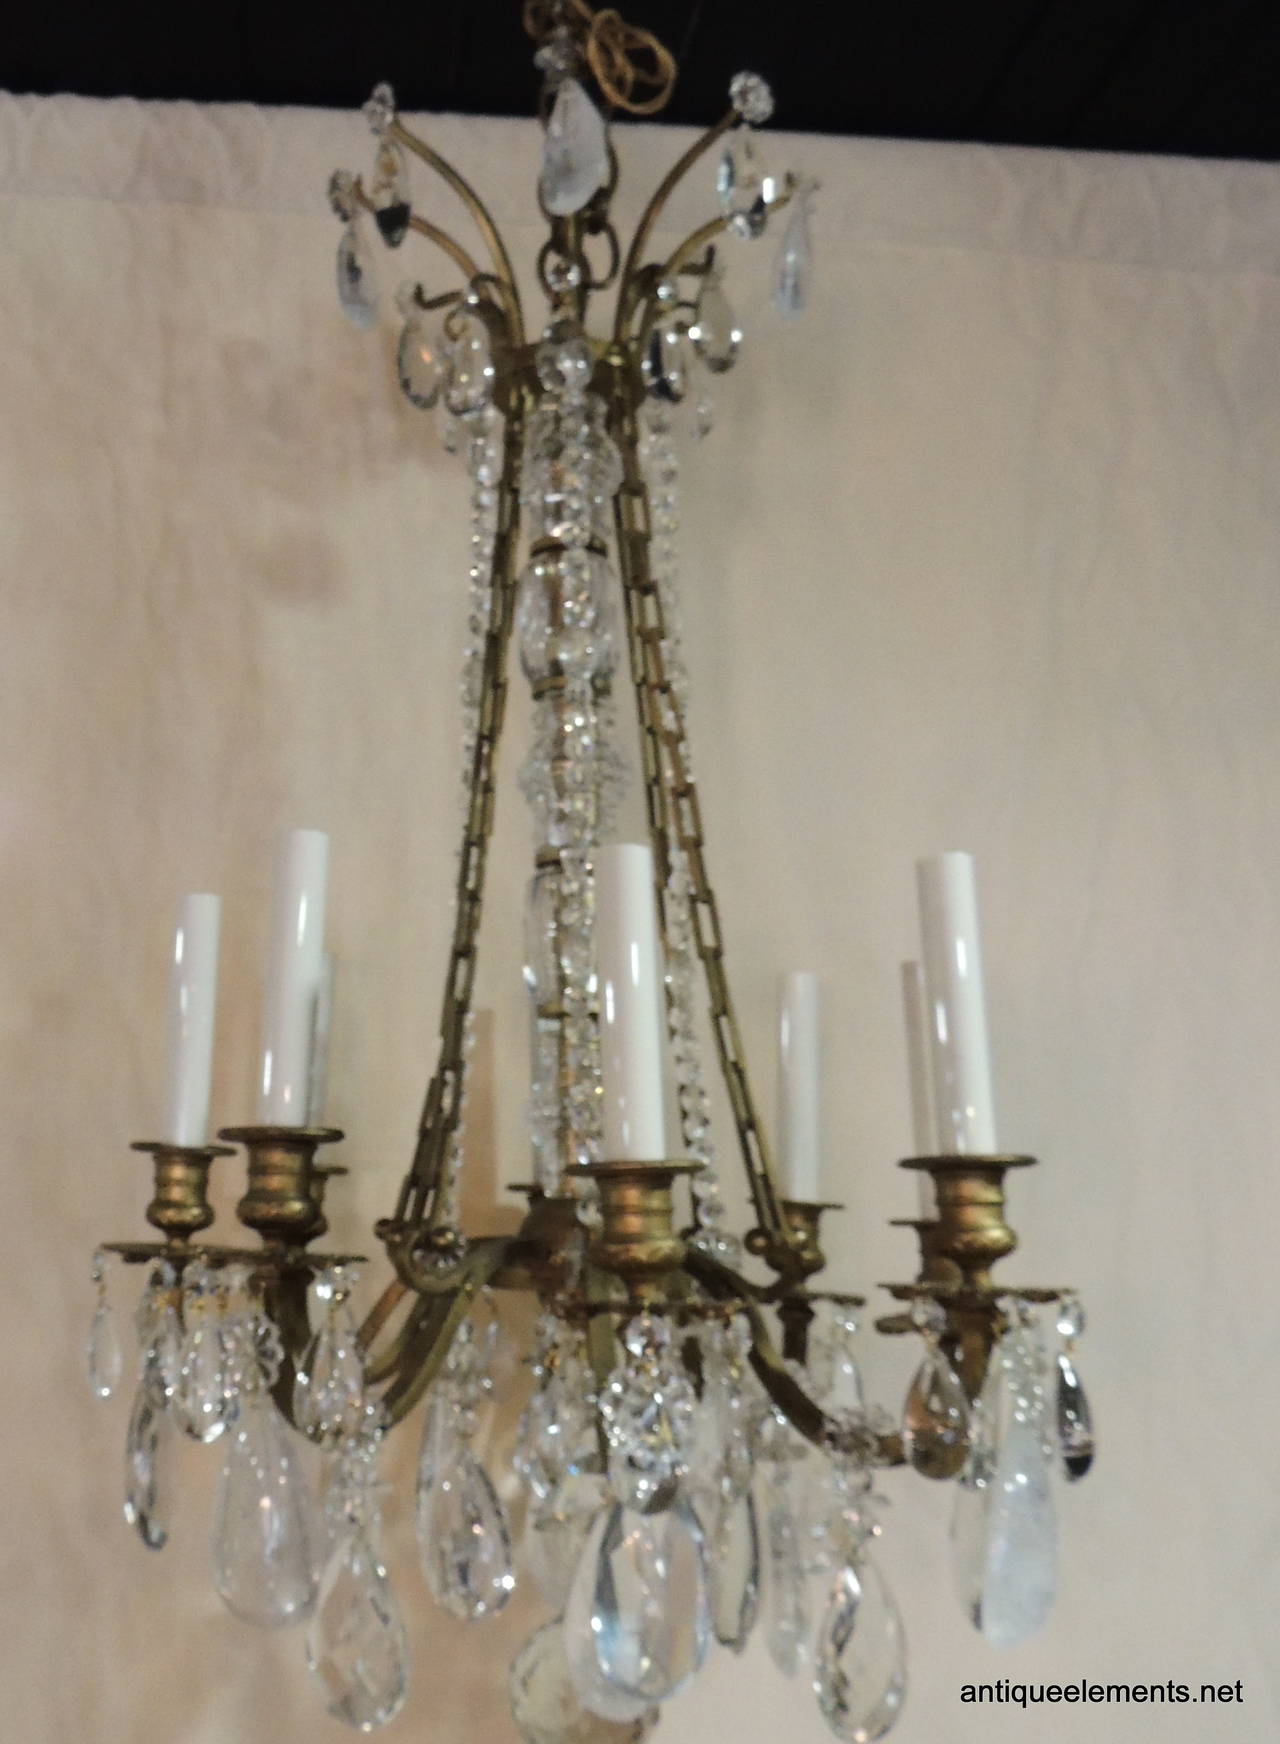 A wonderful gently aged French bronze chandelier with eight arms, center crystal chains and crystal crown finished with both rock and cut crystal pendants. The center is adorned with variated crystal columns.

Measures: 17